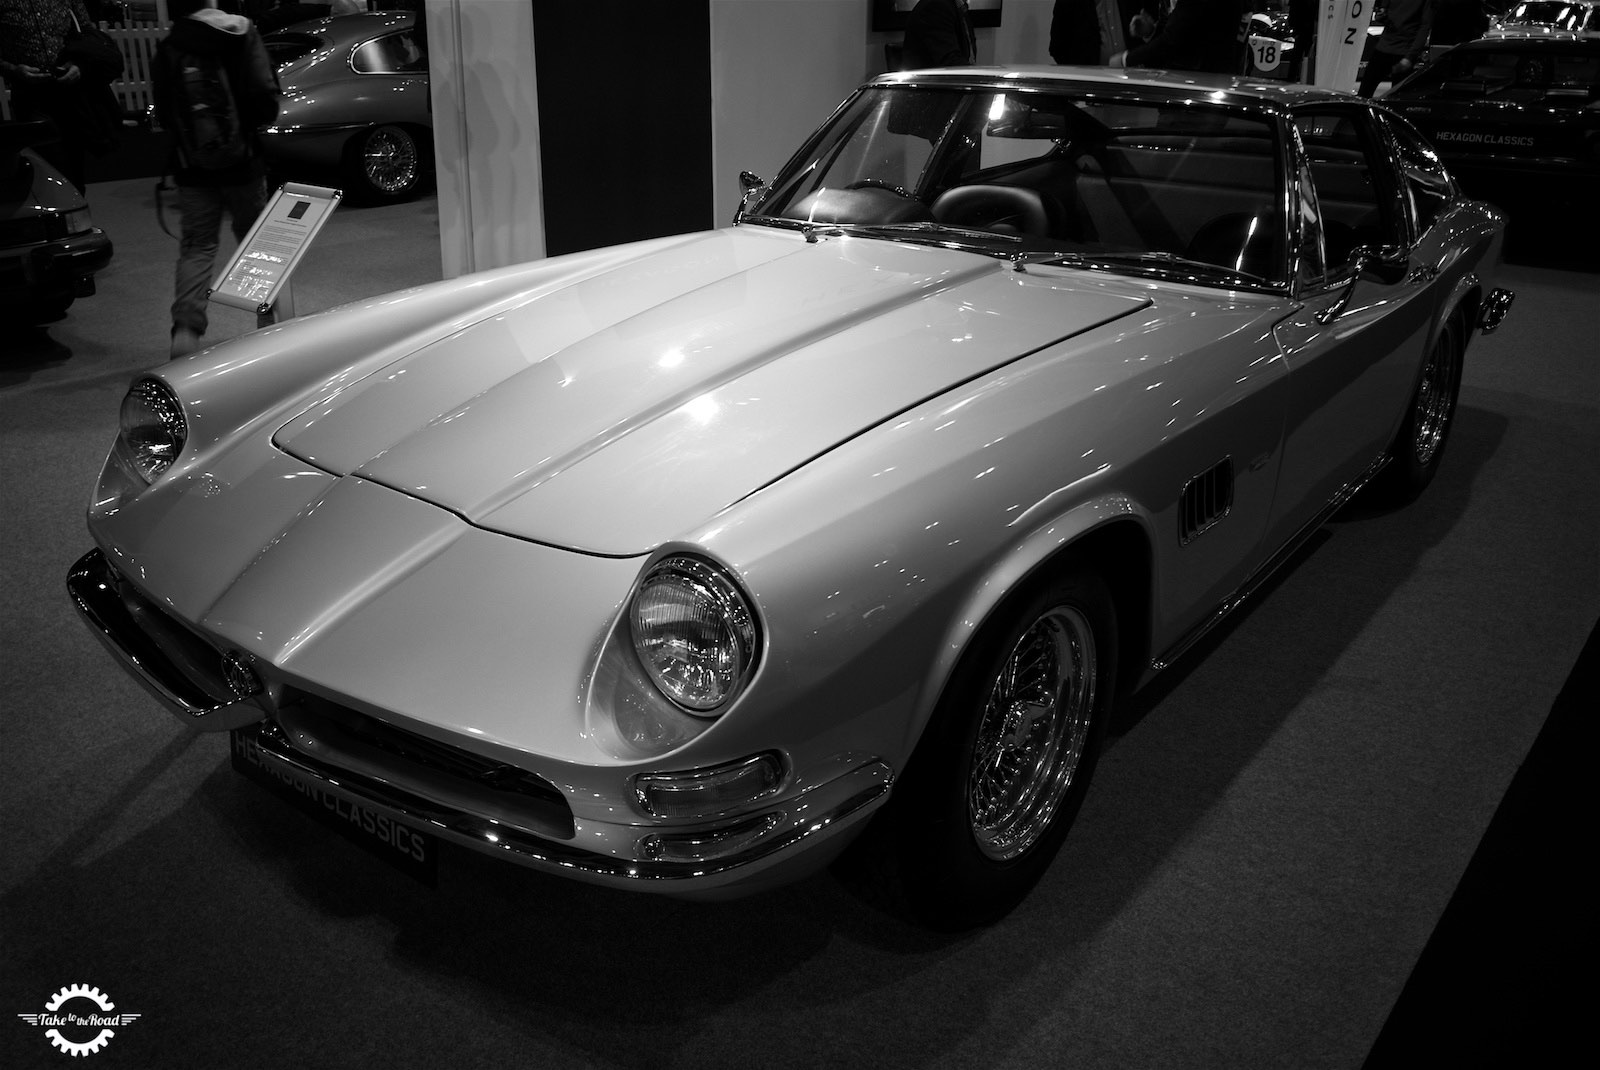 Take to the Road News London Classic Car Show